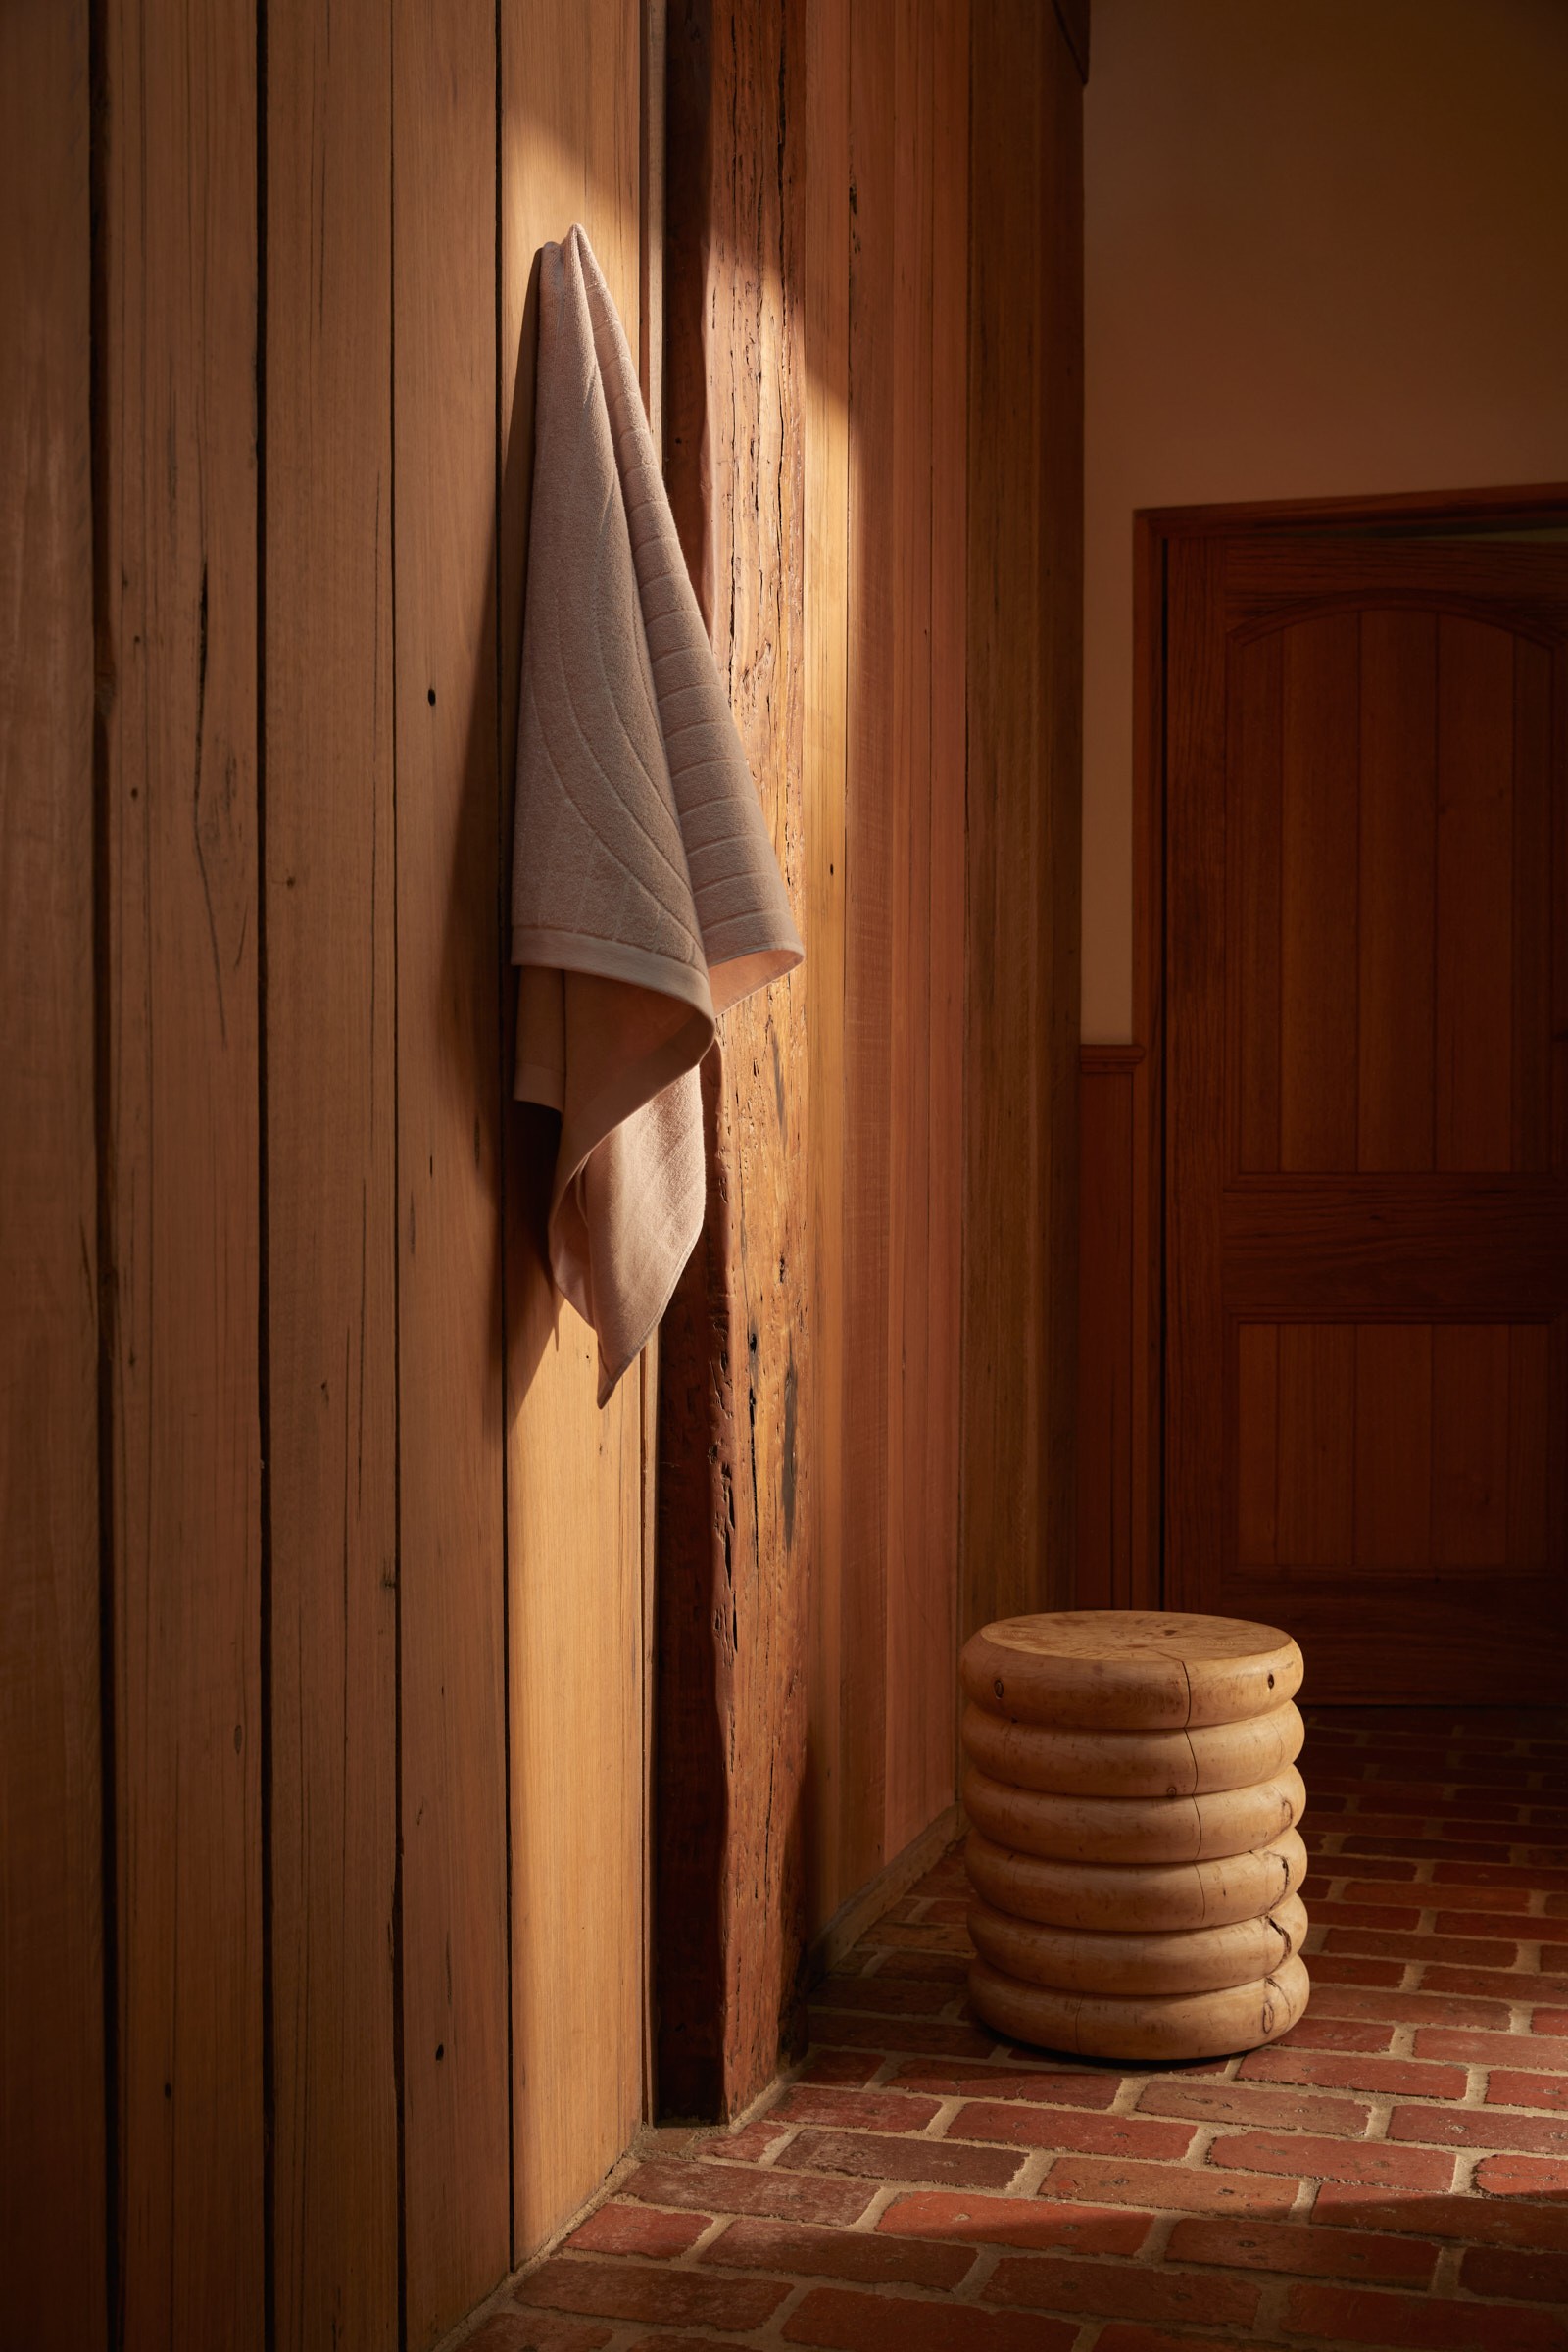 a stack of towels hanging on a wooden wall